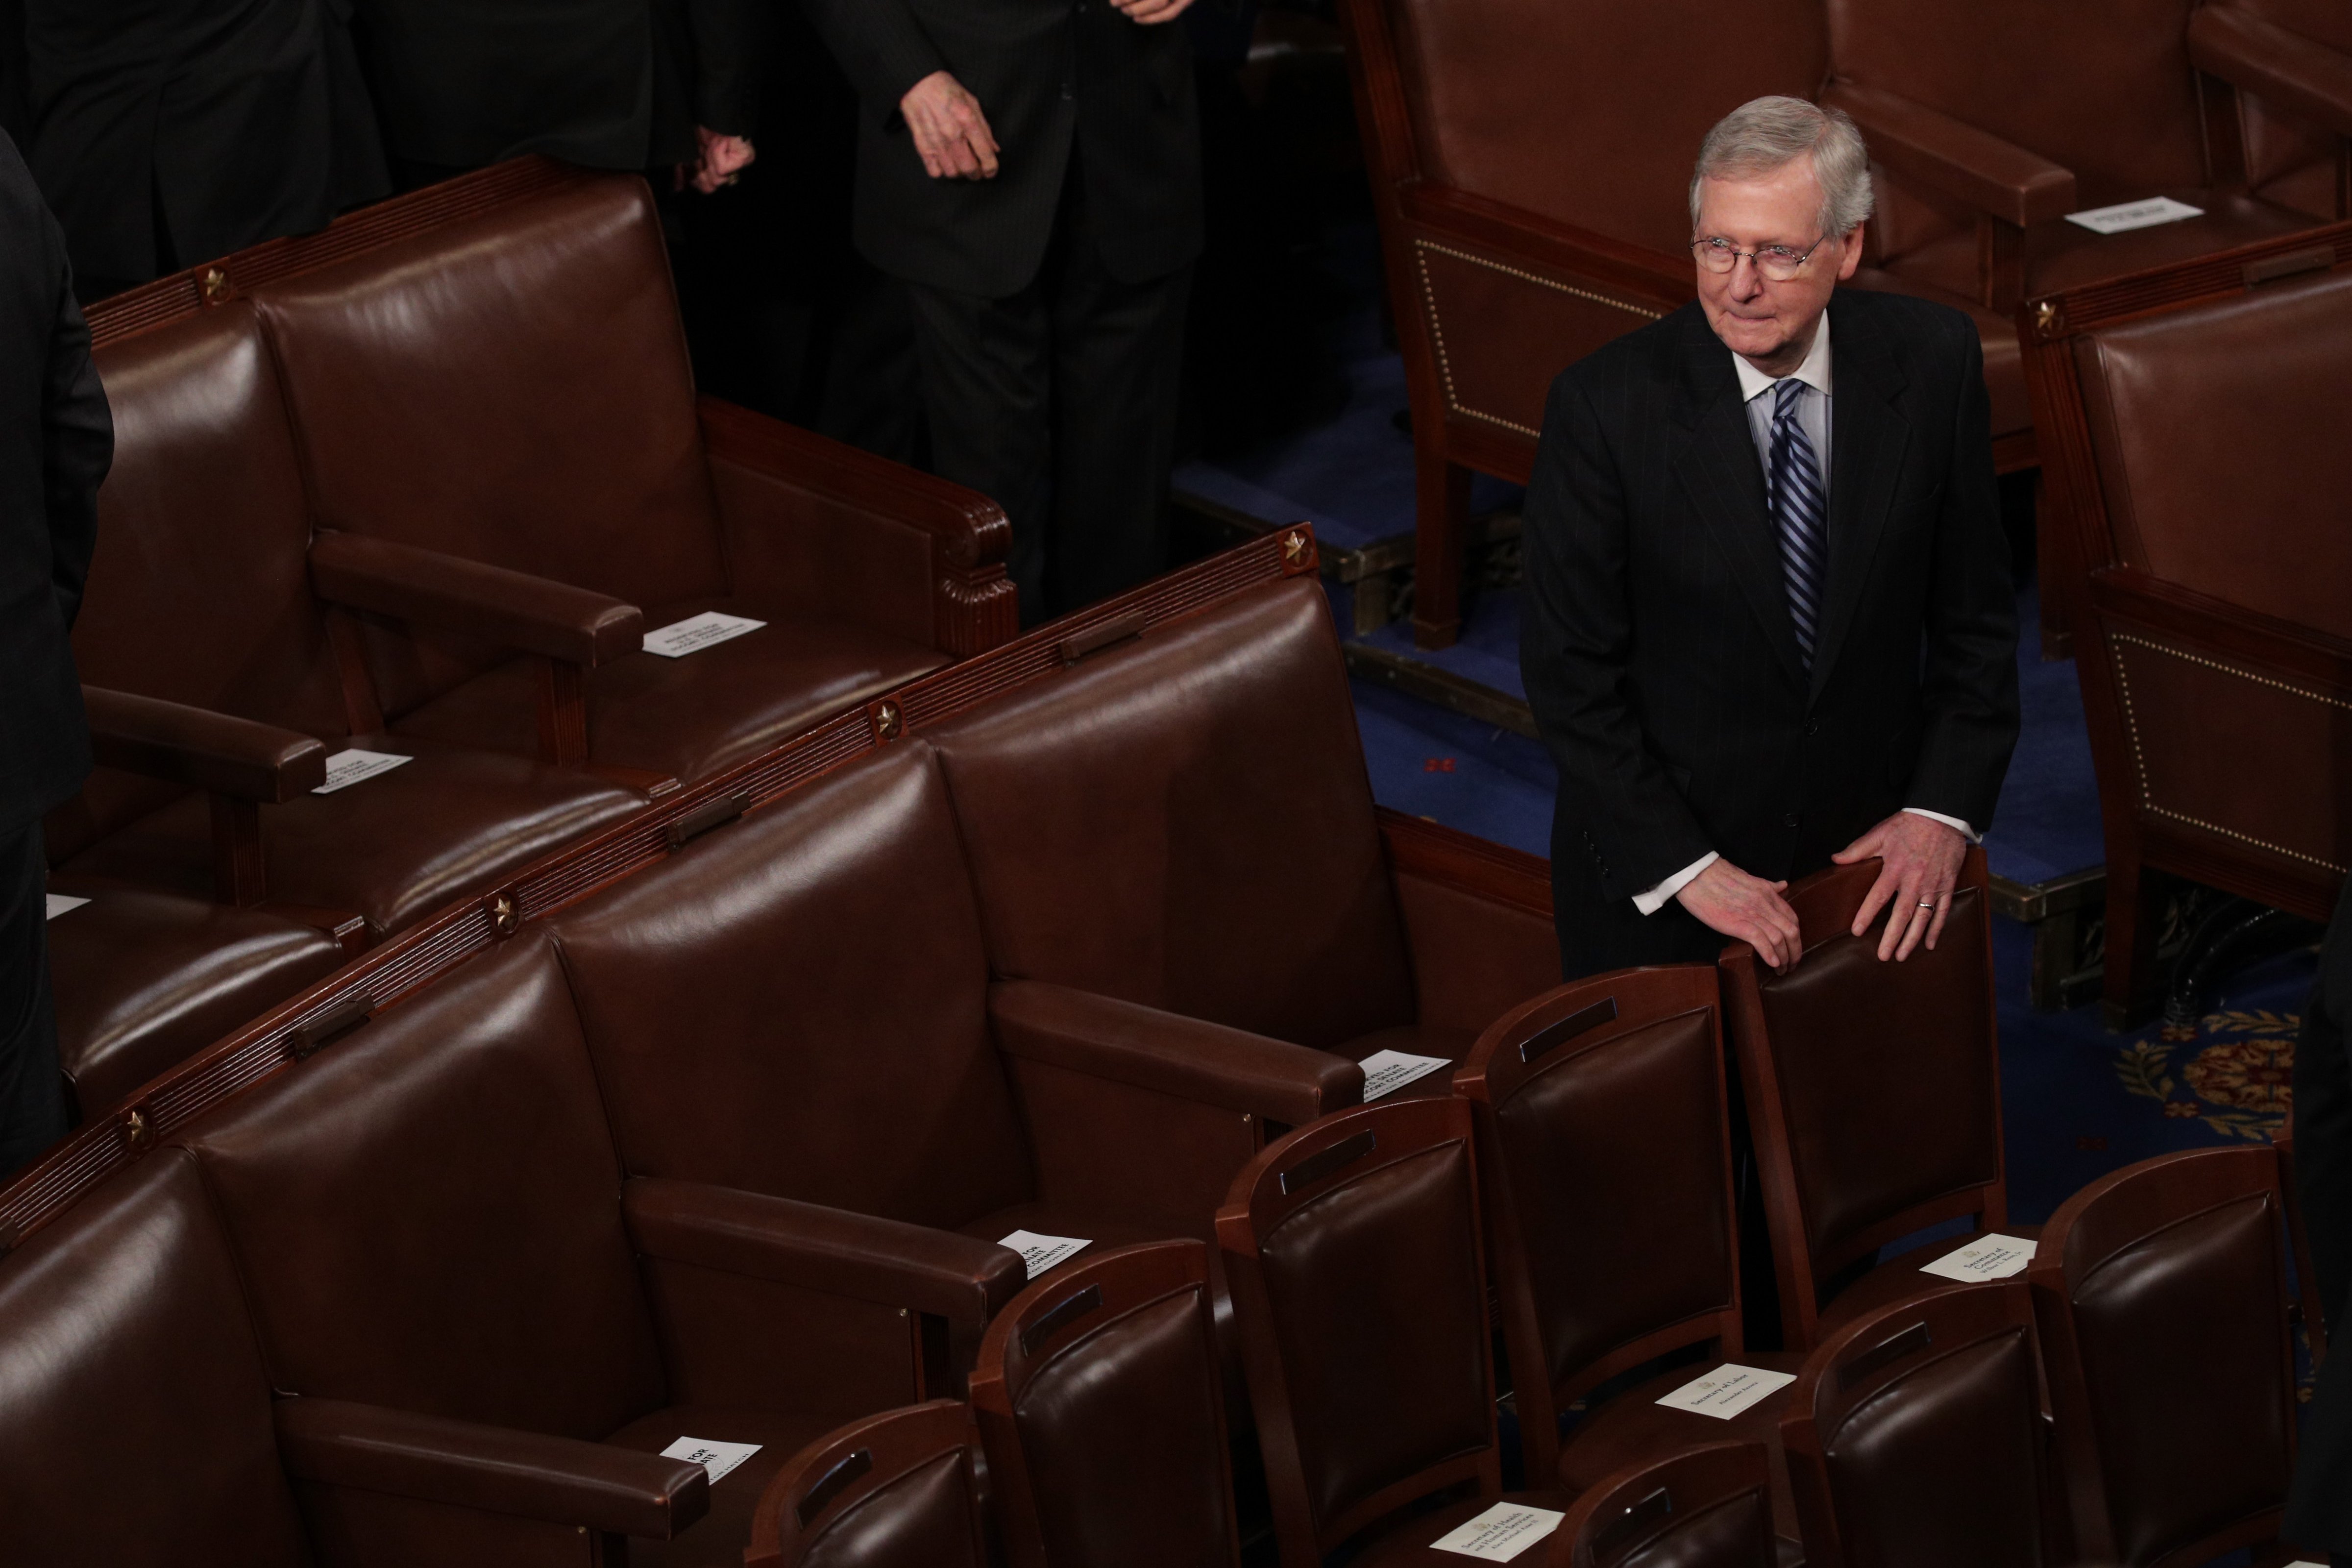 U.S. Senate Majority Leader Sen. Mitch McConnell (R-KY) waits for the start of the State of the Union address in the chamber of the U.S. House of Representatives January 30, 2018 in Washington, DC. This is the first State of the Union address given by U.S. President Donald Trump and his second joint-session address to Congress. (Alex Wong—Getty Images)